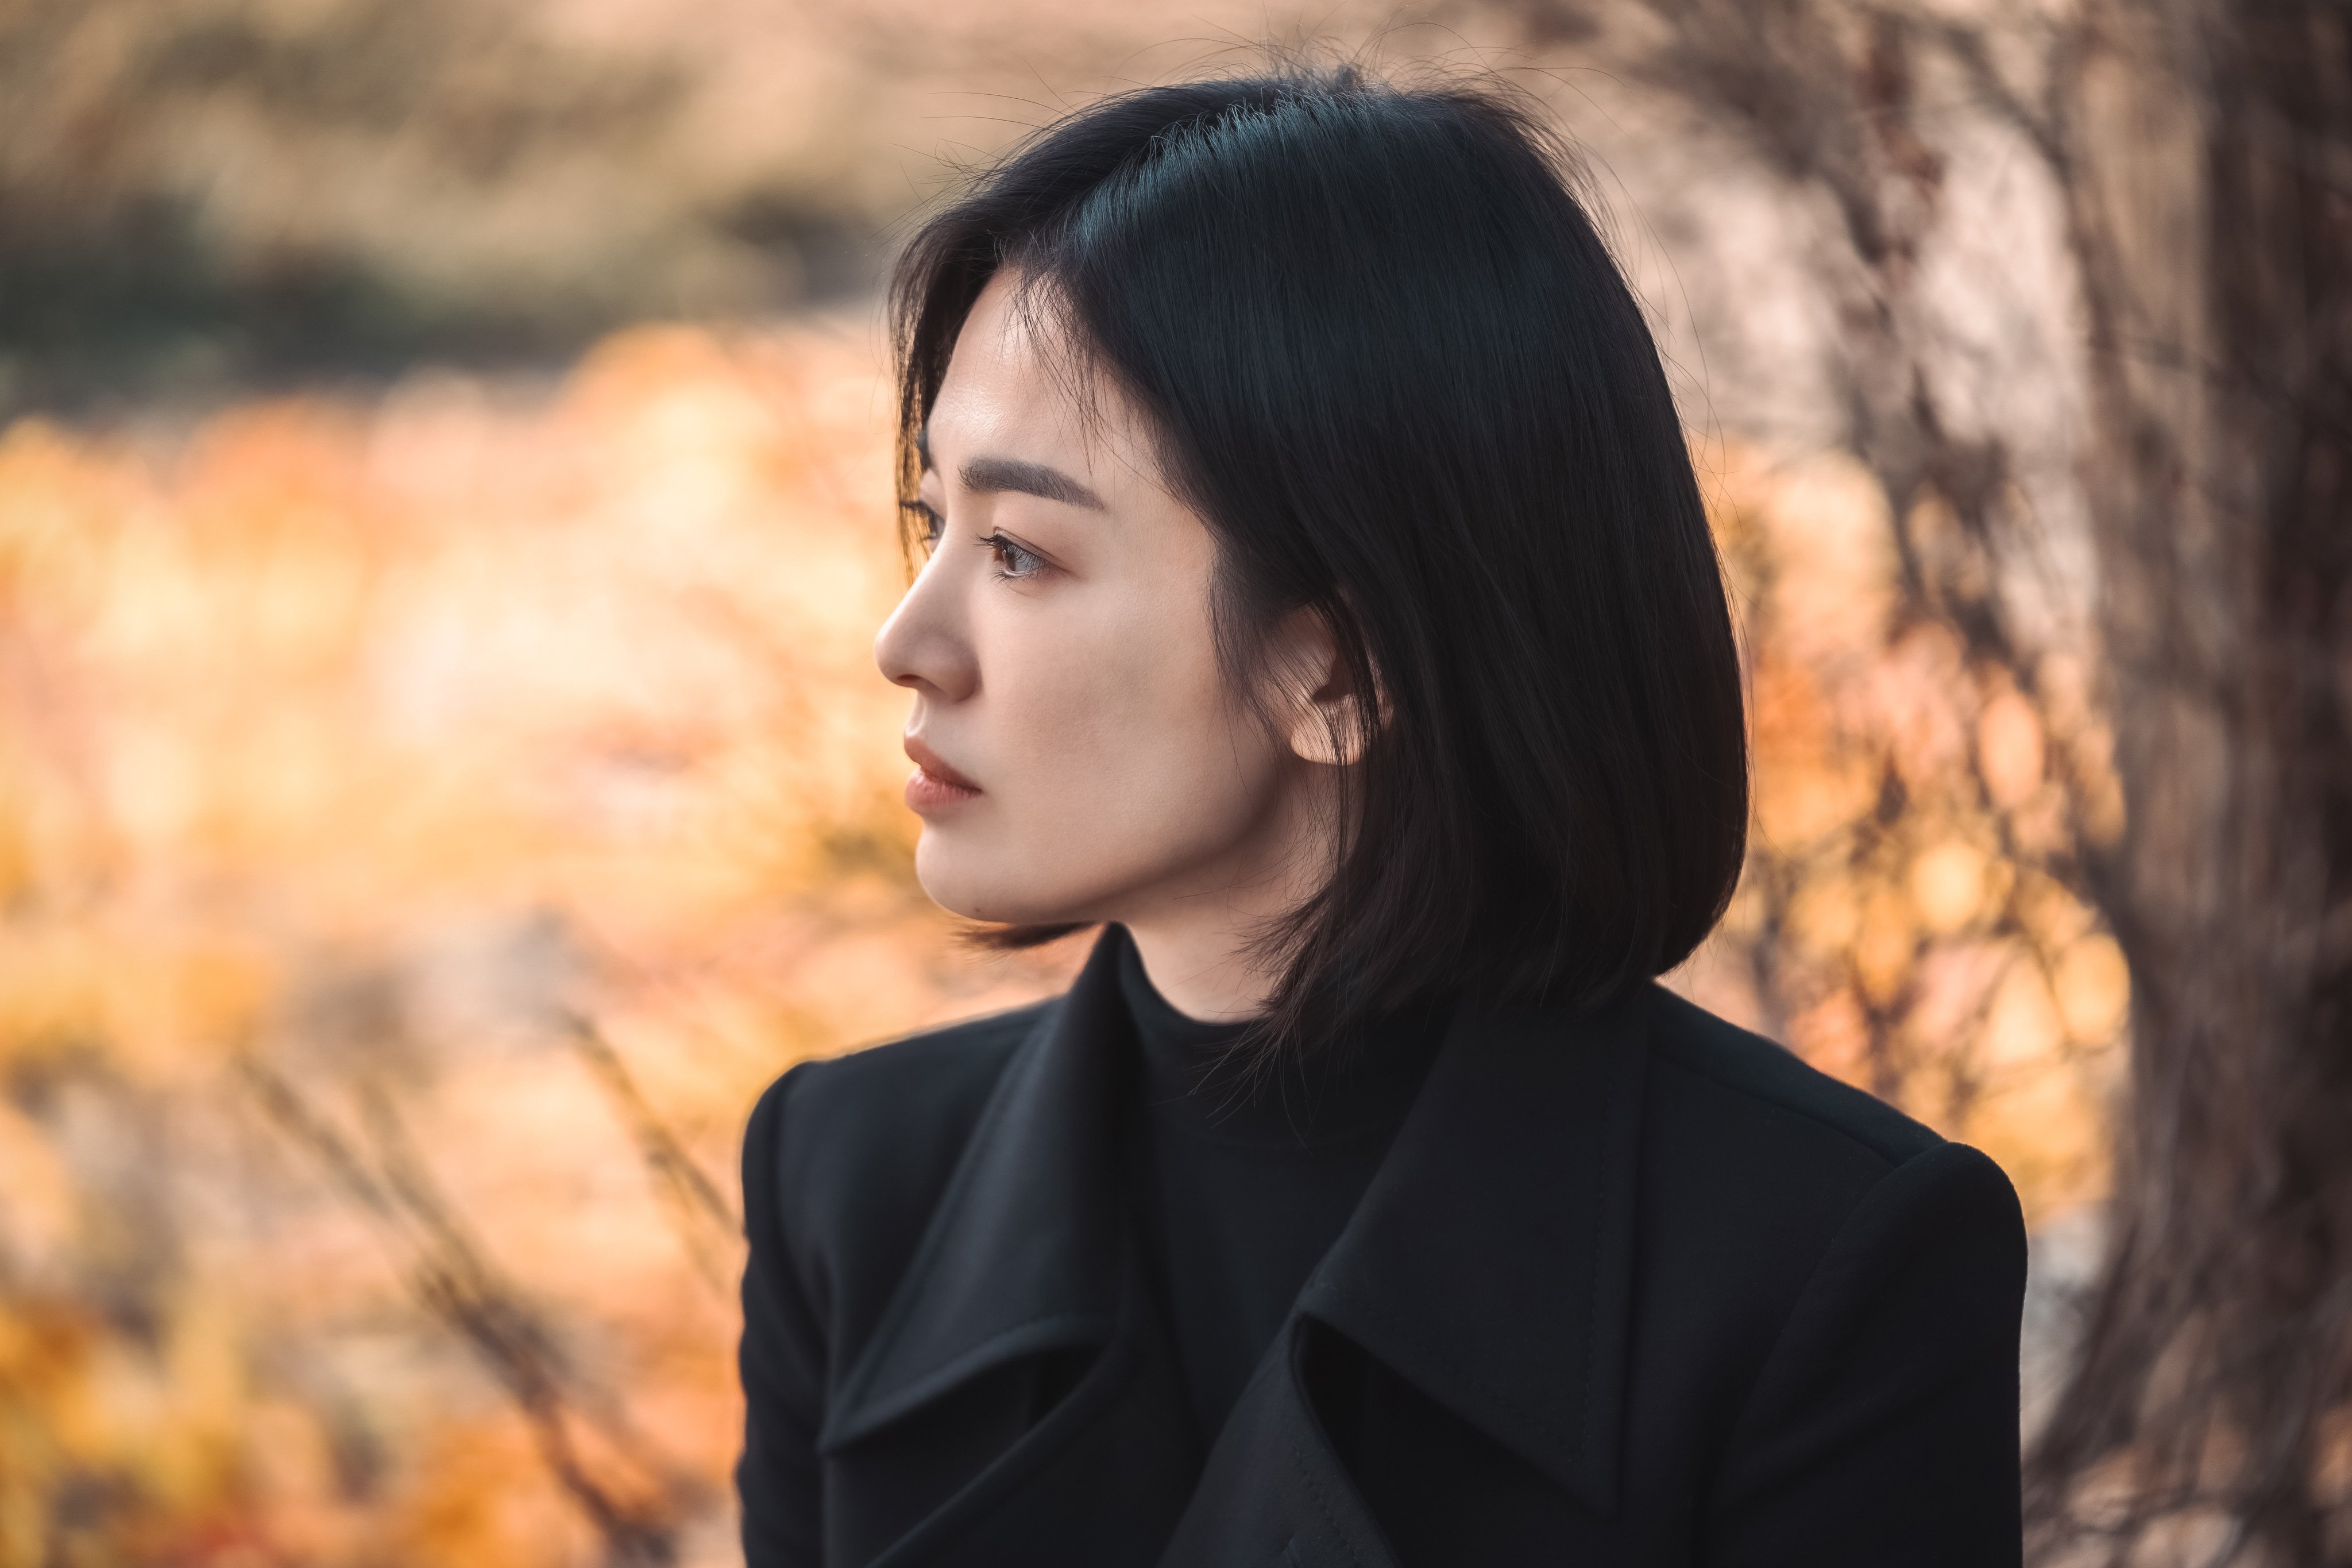 Song Hye-kyo as Moon Dong-eun in a still from The Glory. Photo: Graphyoda/Netflix